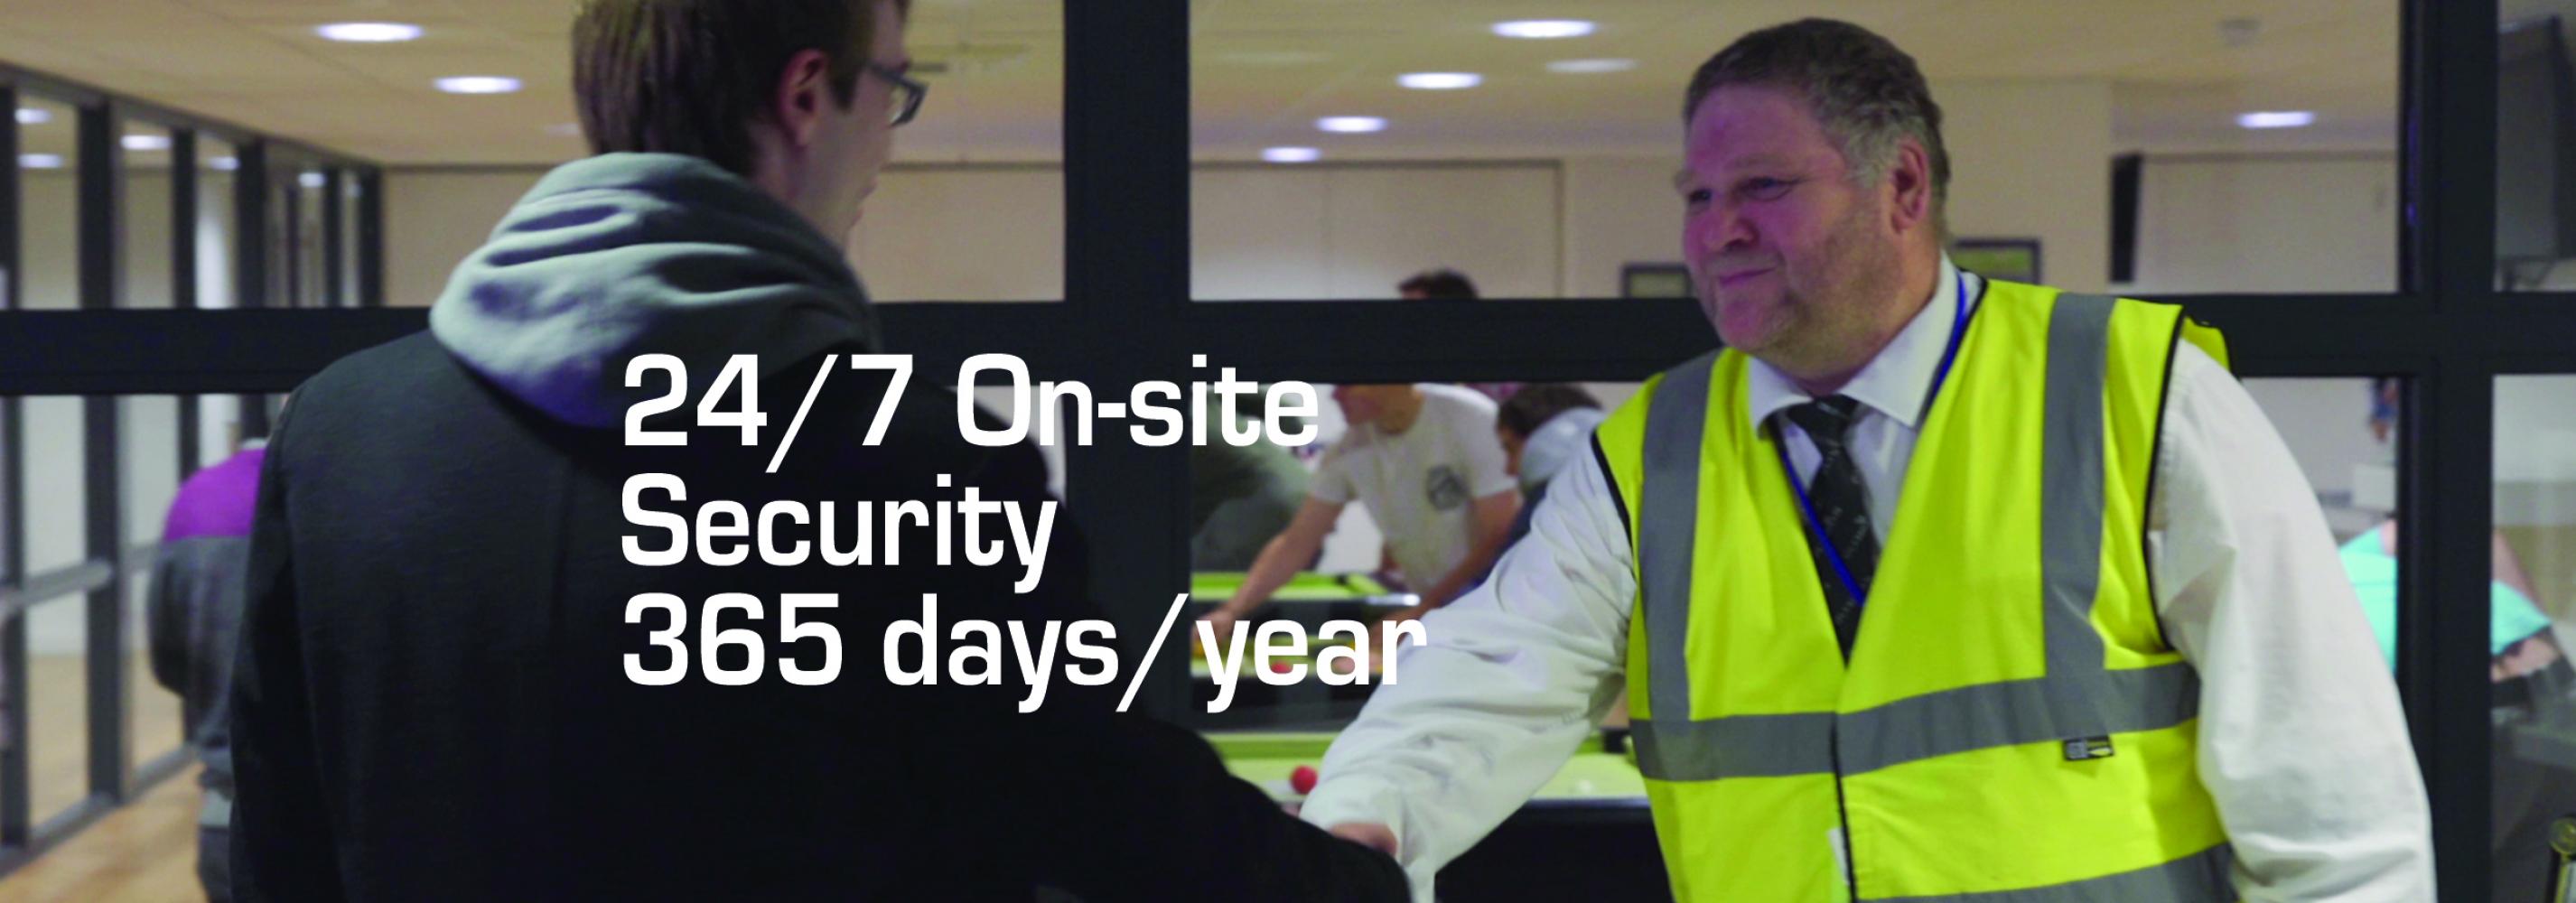 A safe and secure site, with 24/7 on-site security, 365 days a year